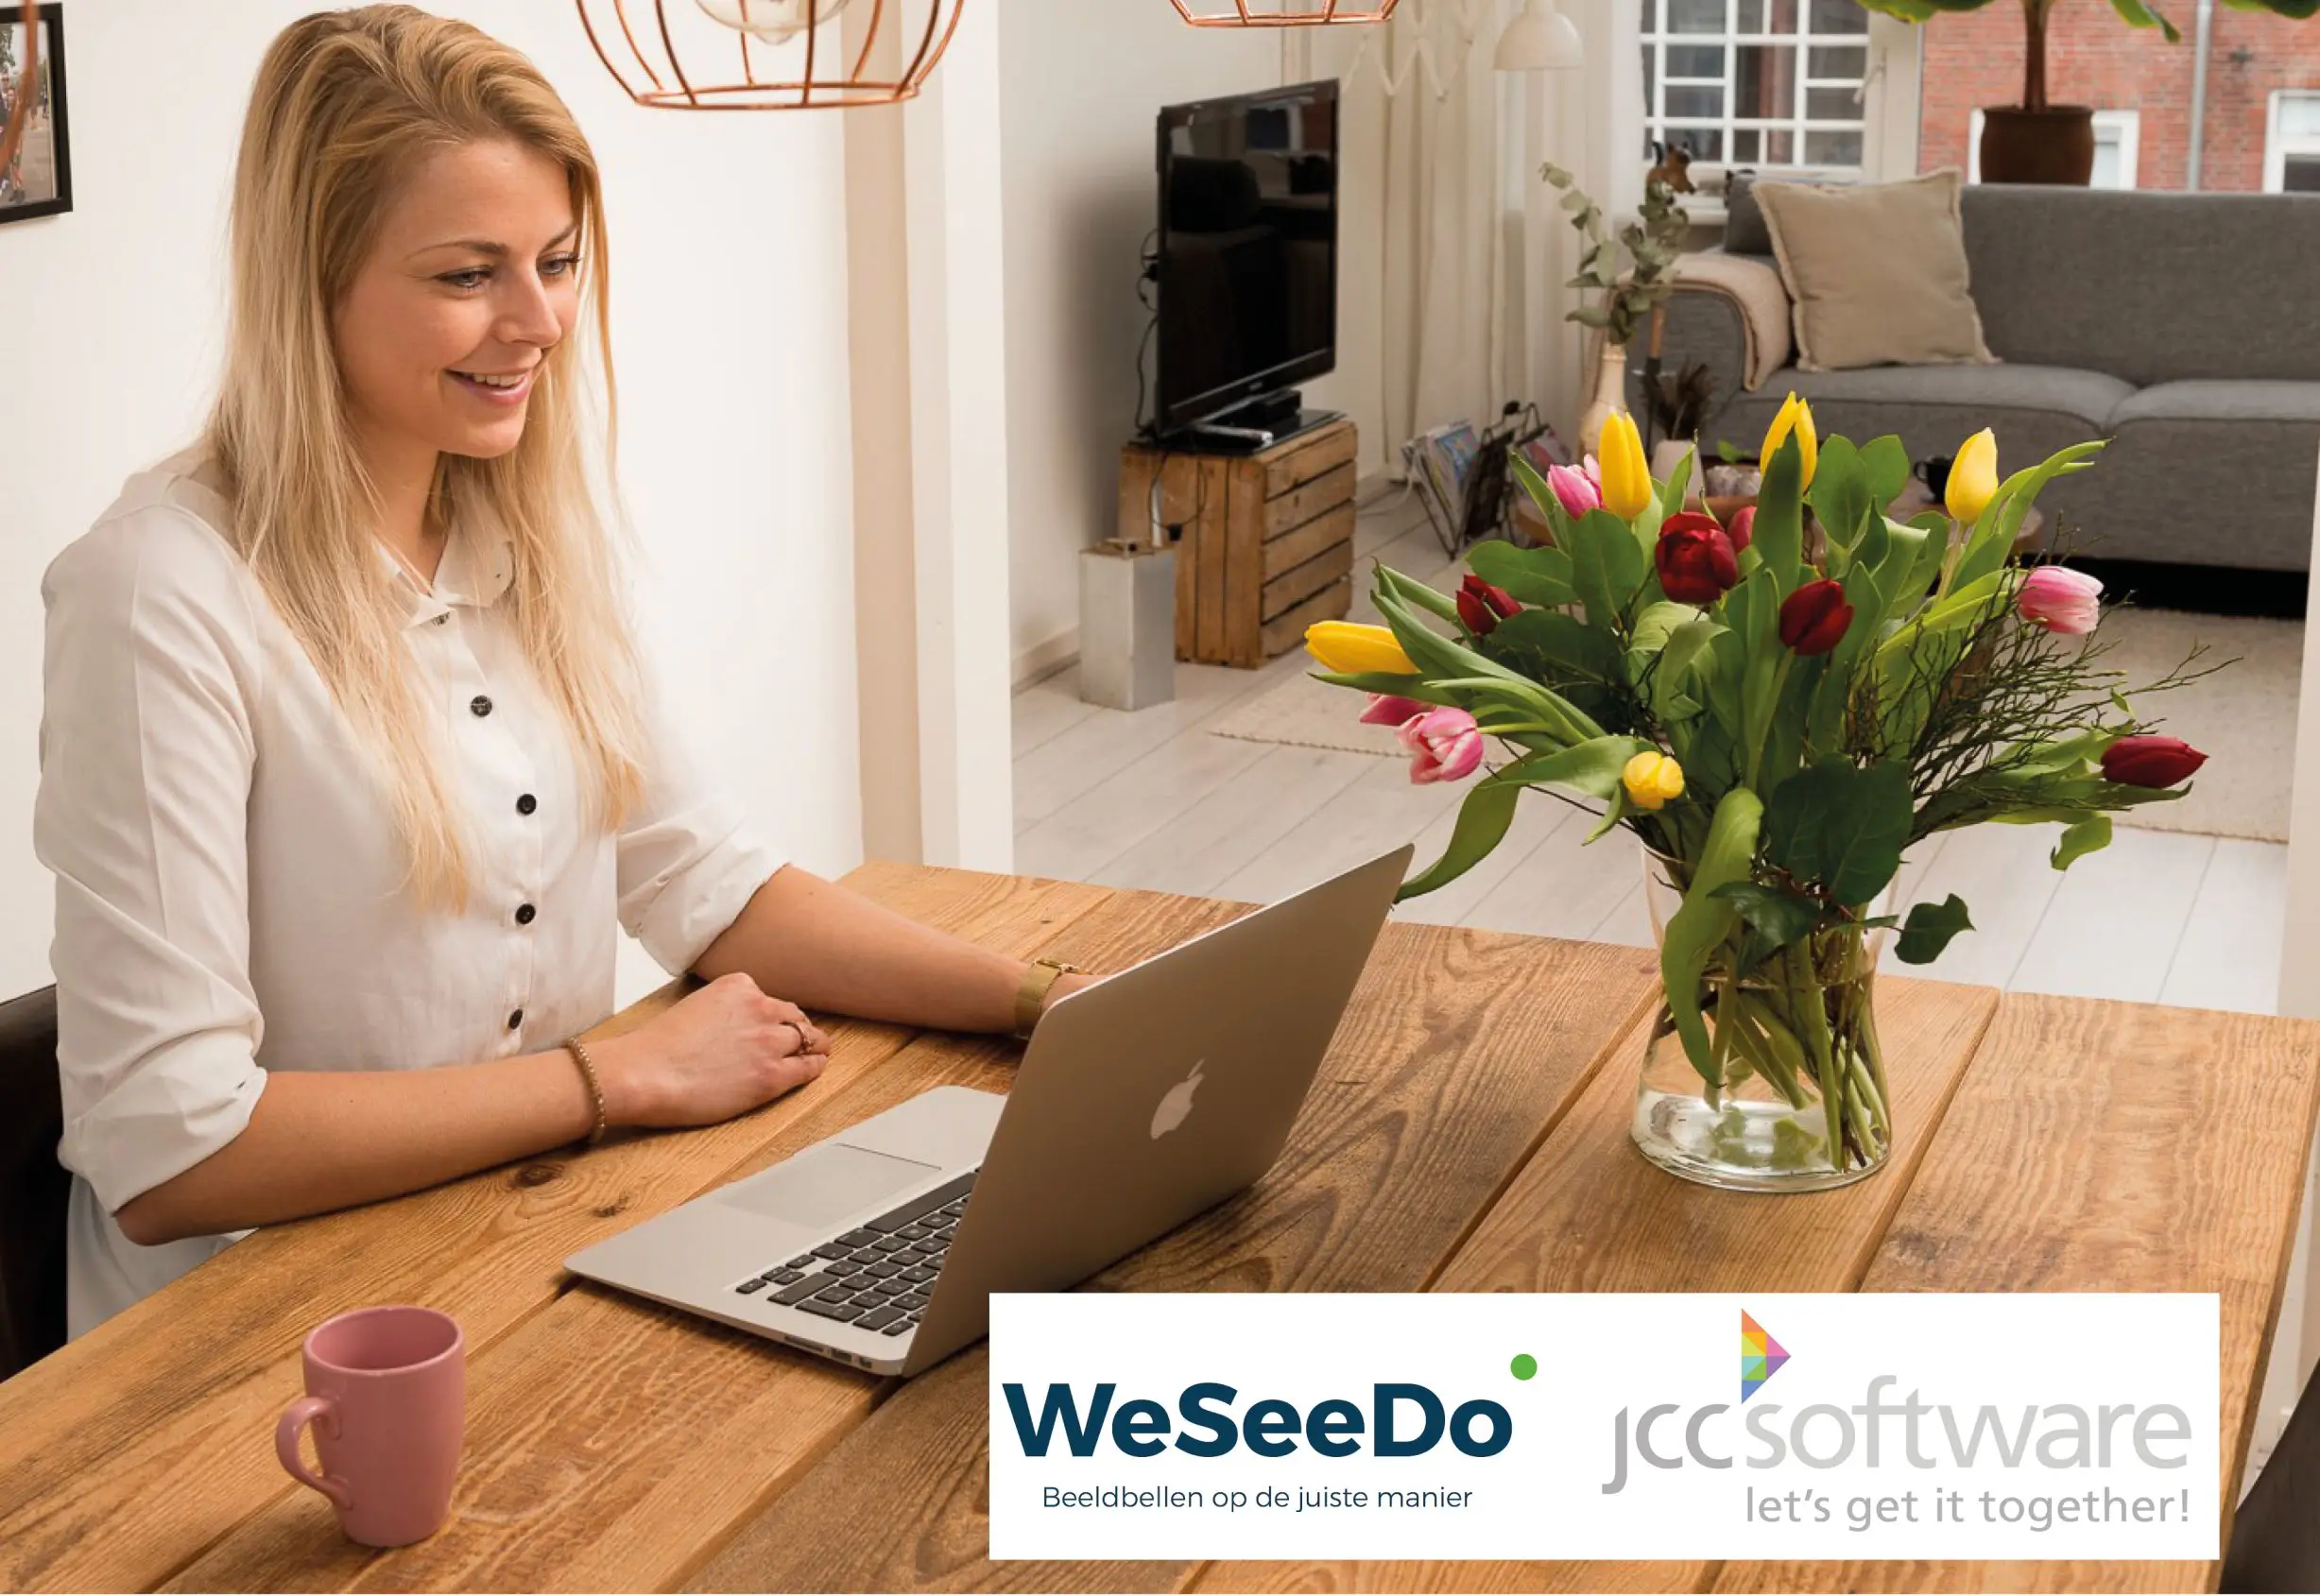 Girl behind computer at table with logo WeSeeDo and JCCsoftware